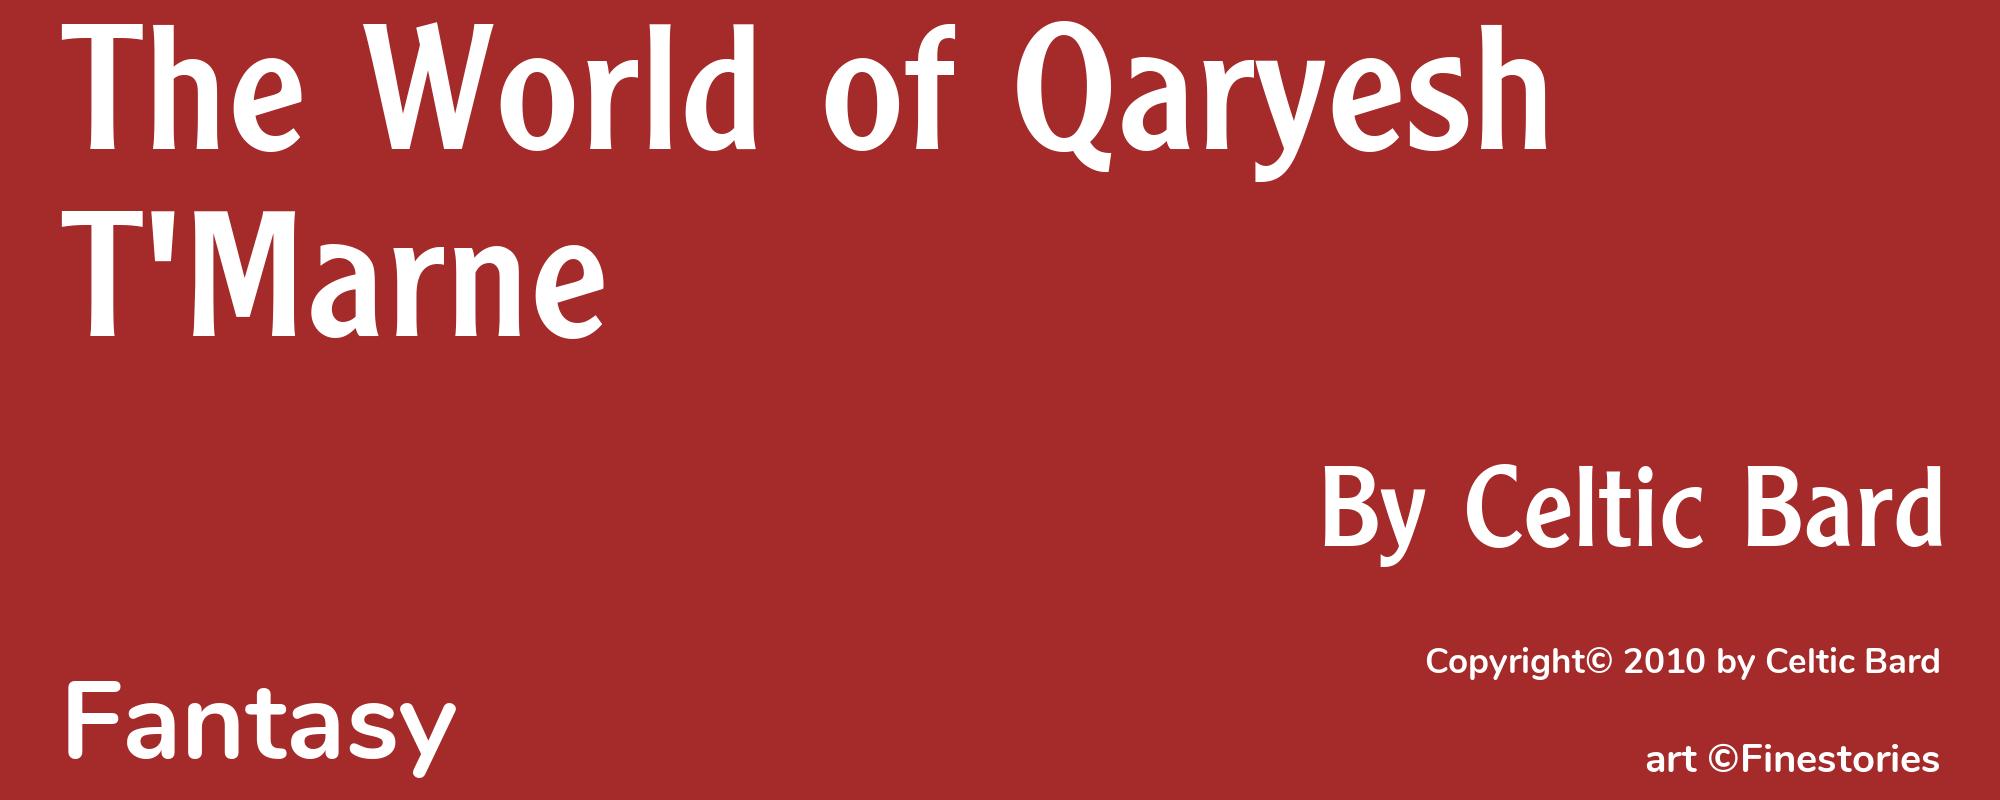 The World of Qaryesh T'Marne - Cover